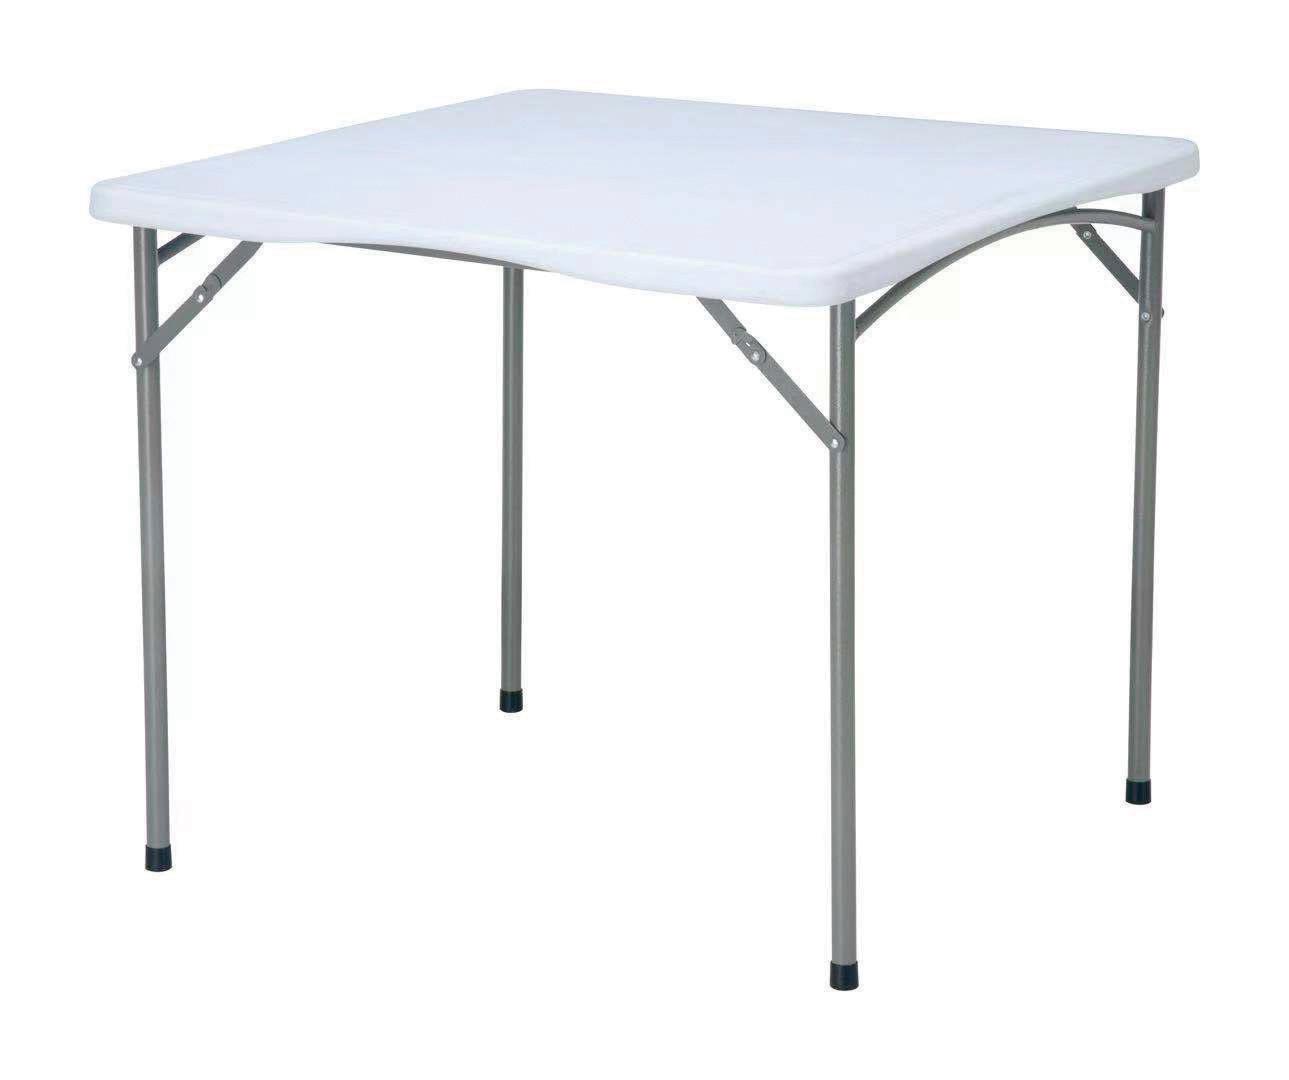 Folding square catering table, 870x870x(h)740mm